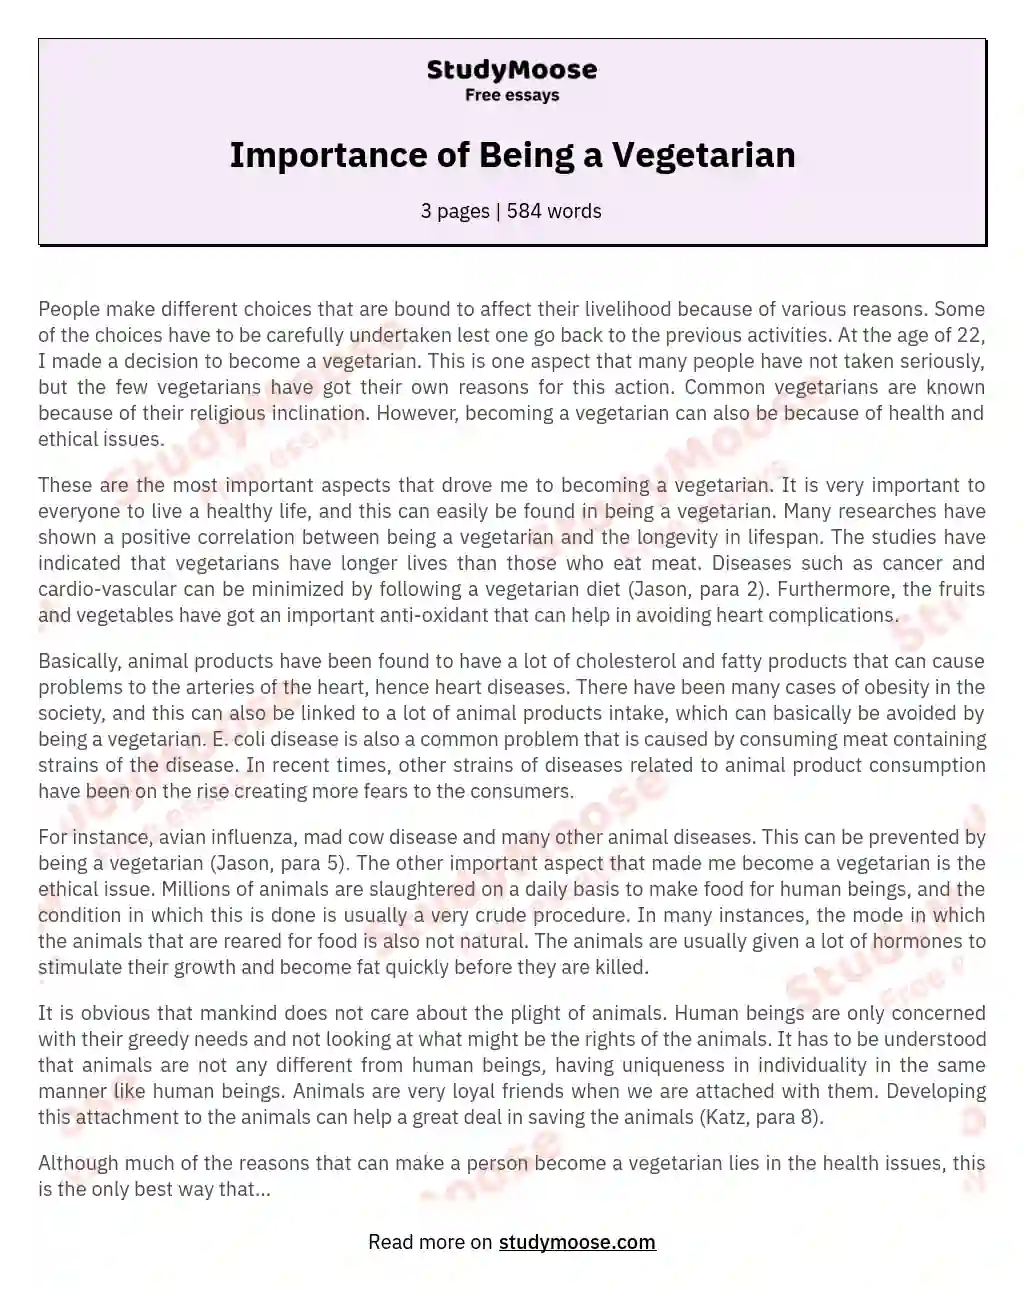 Importance of Being a Vegetarian essay